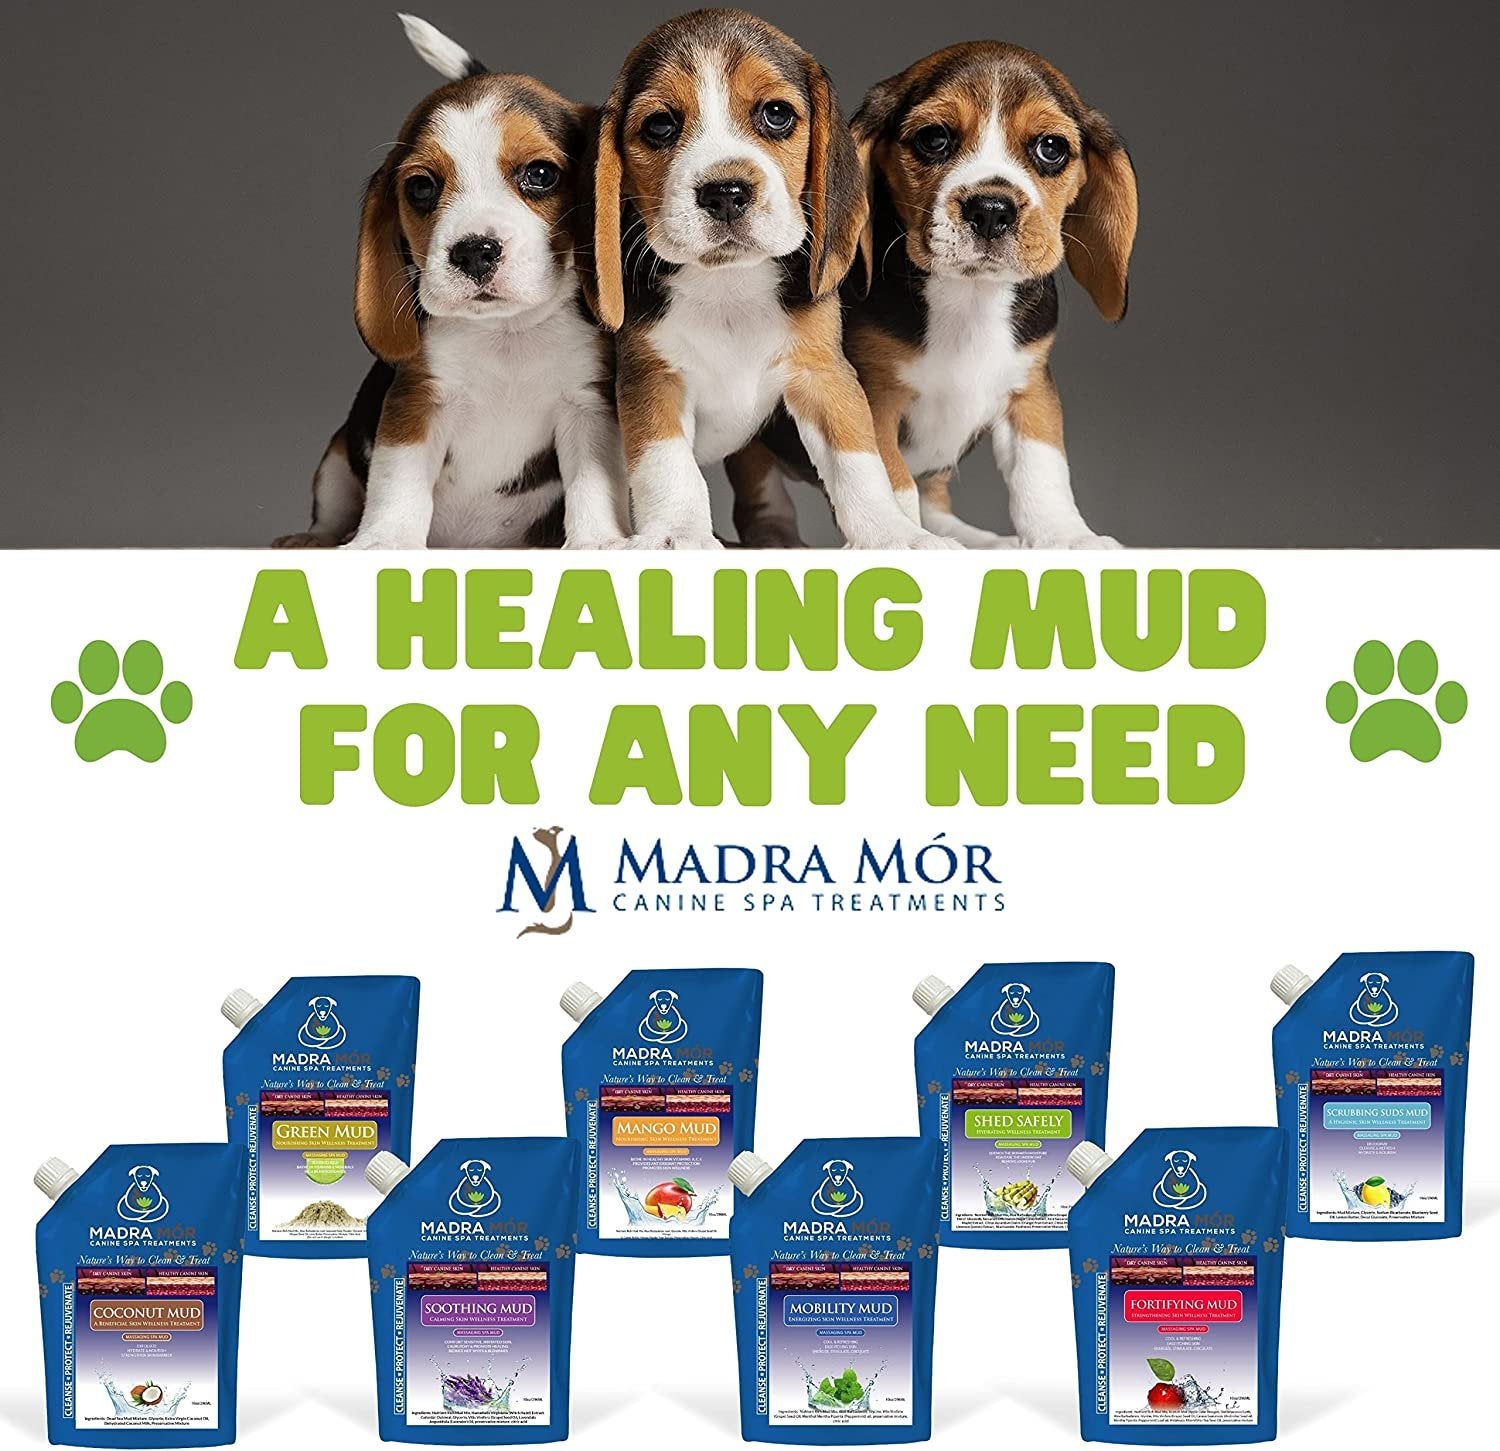 Madra Mor Massaging SPA Mud - Luxurious Dog Skin Wellness Treatment - Cleanse - Protect - Rejuvenate - Shed Safely - 1 Pack (10oz) - with Multi-Purpose Key Chain